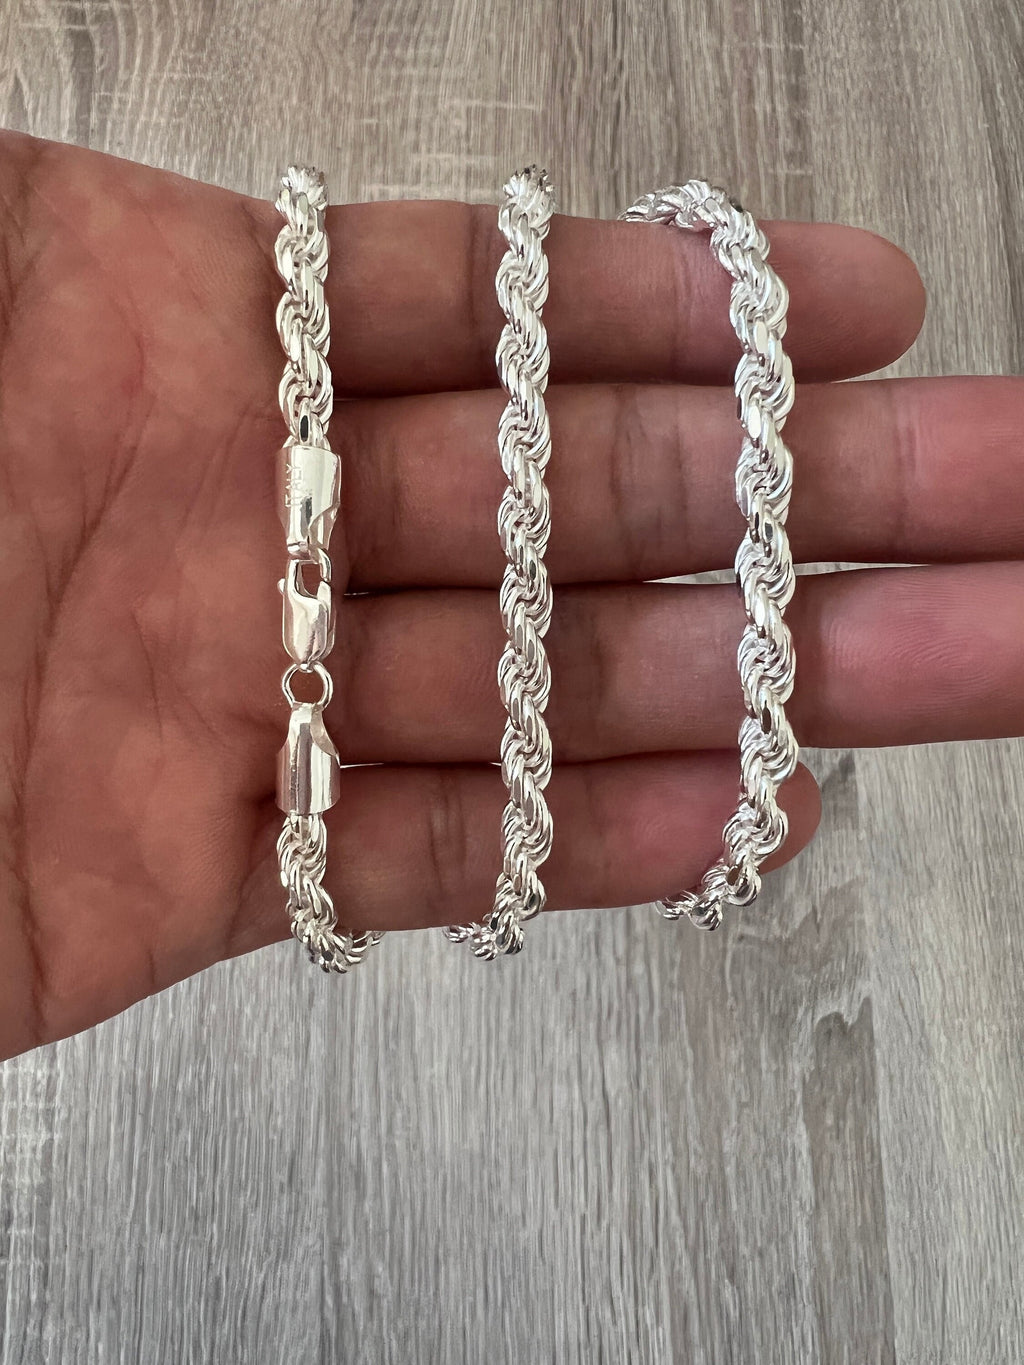 sterling silver rope chain, mens silver chains, mens silver chain